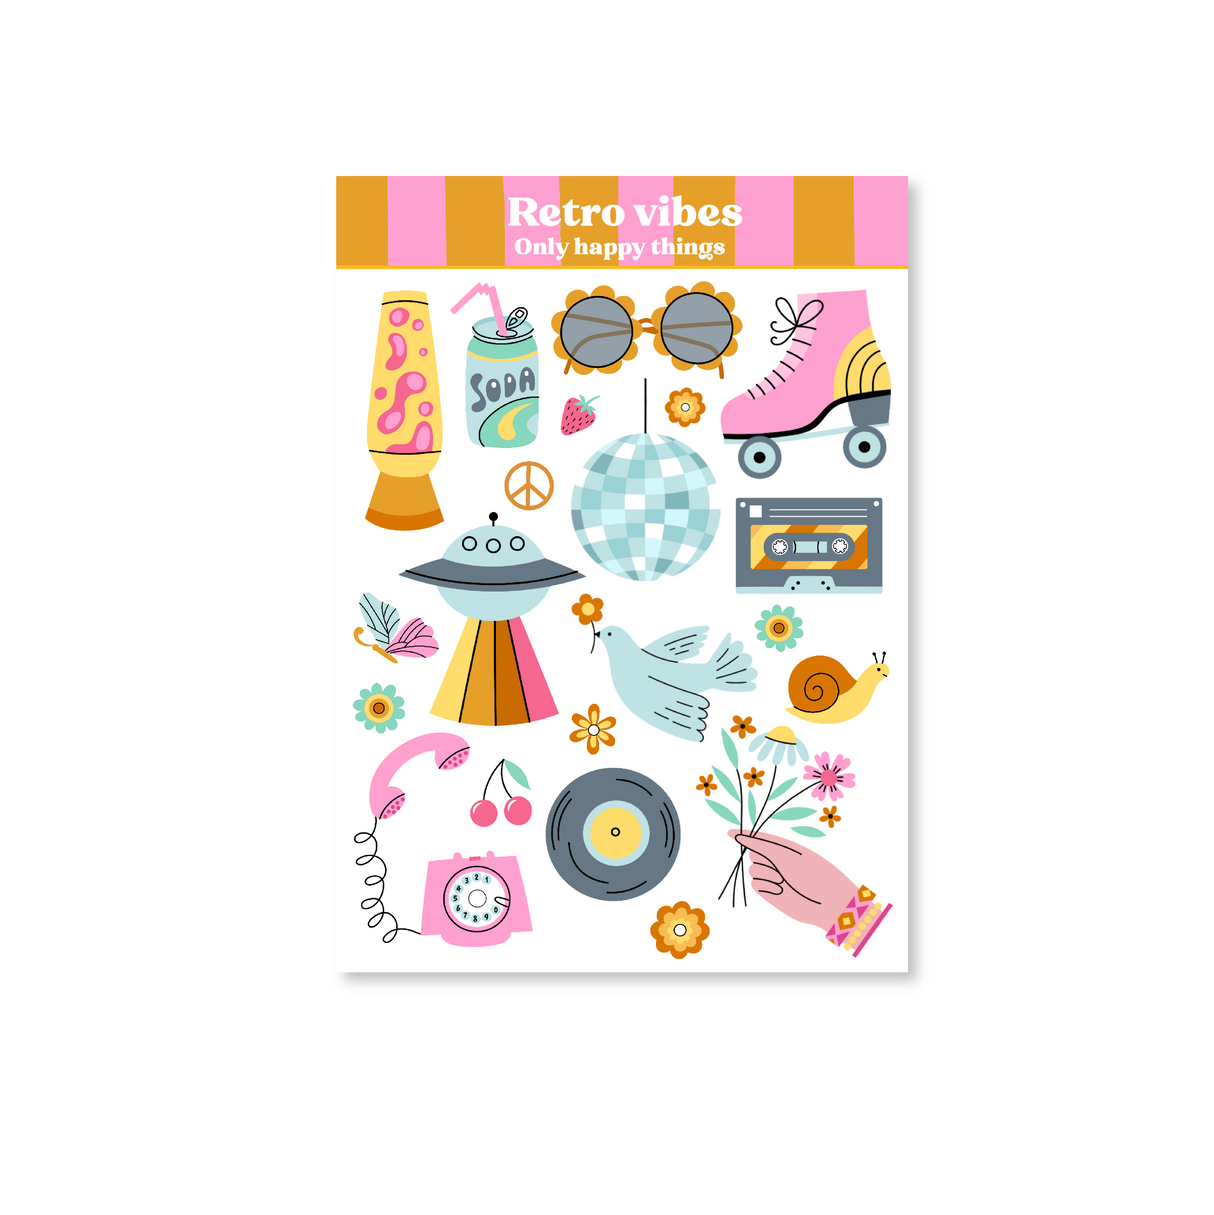 Retro Vibes Sticker Sheet with cartoon illustrated disc ball, roller skates, lava lamp, phone, record, tape cassette, and flowers in shades of pink, yellow, brown and orange